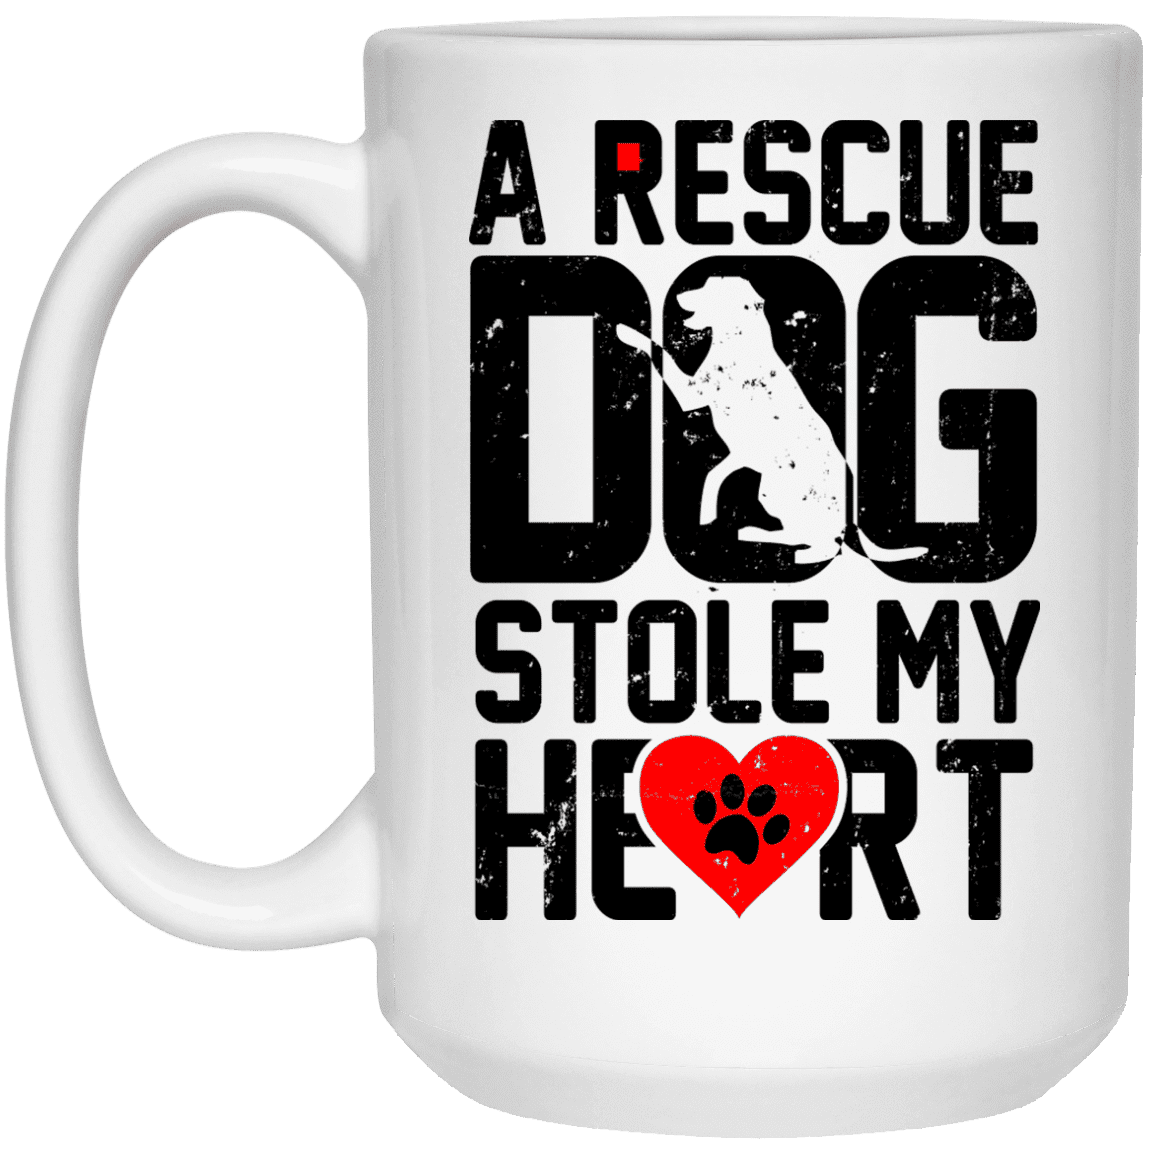 A Rescue Dog Stole My Heart - Mugs.